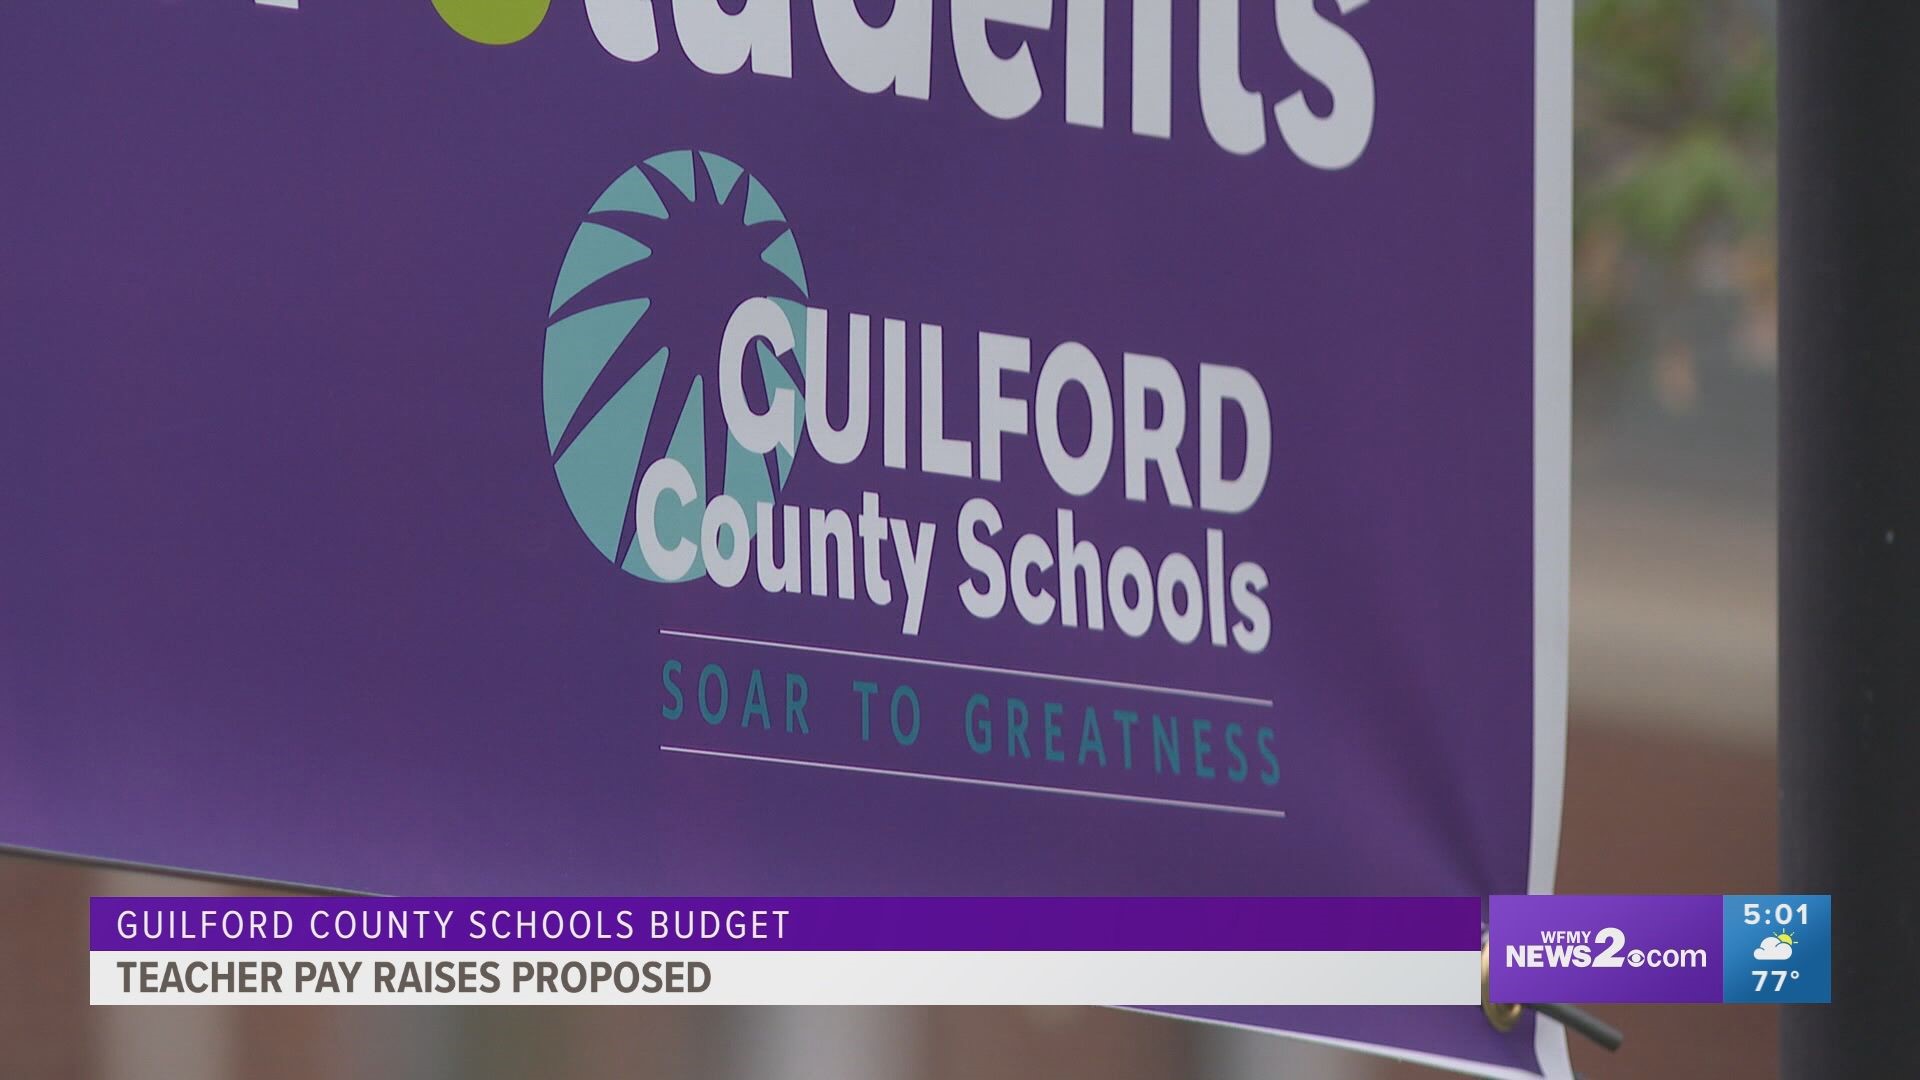 Guilford County School's latest budget proposal includes pay raises for staff across the board.